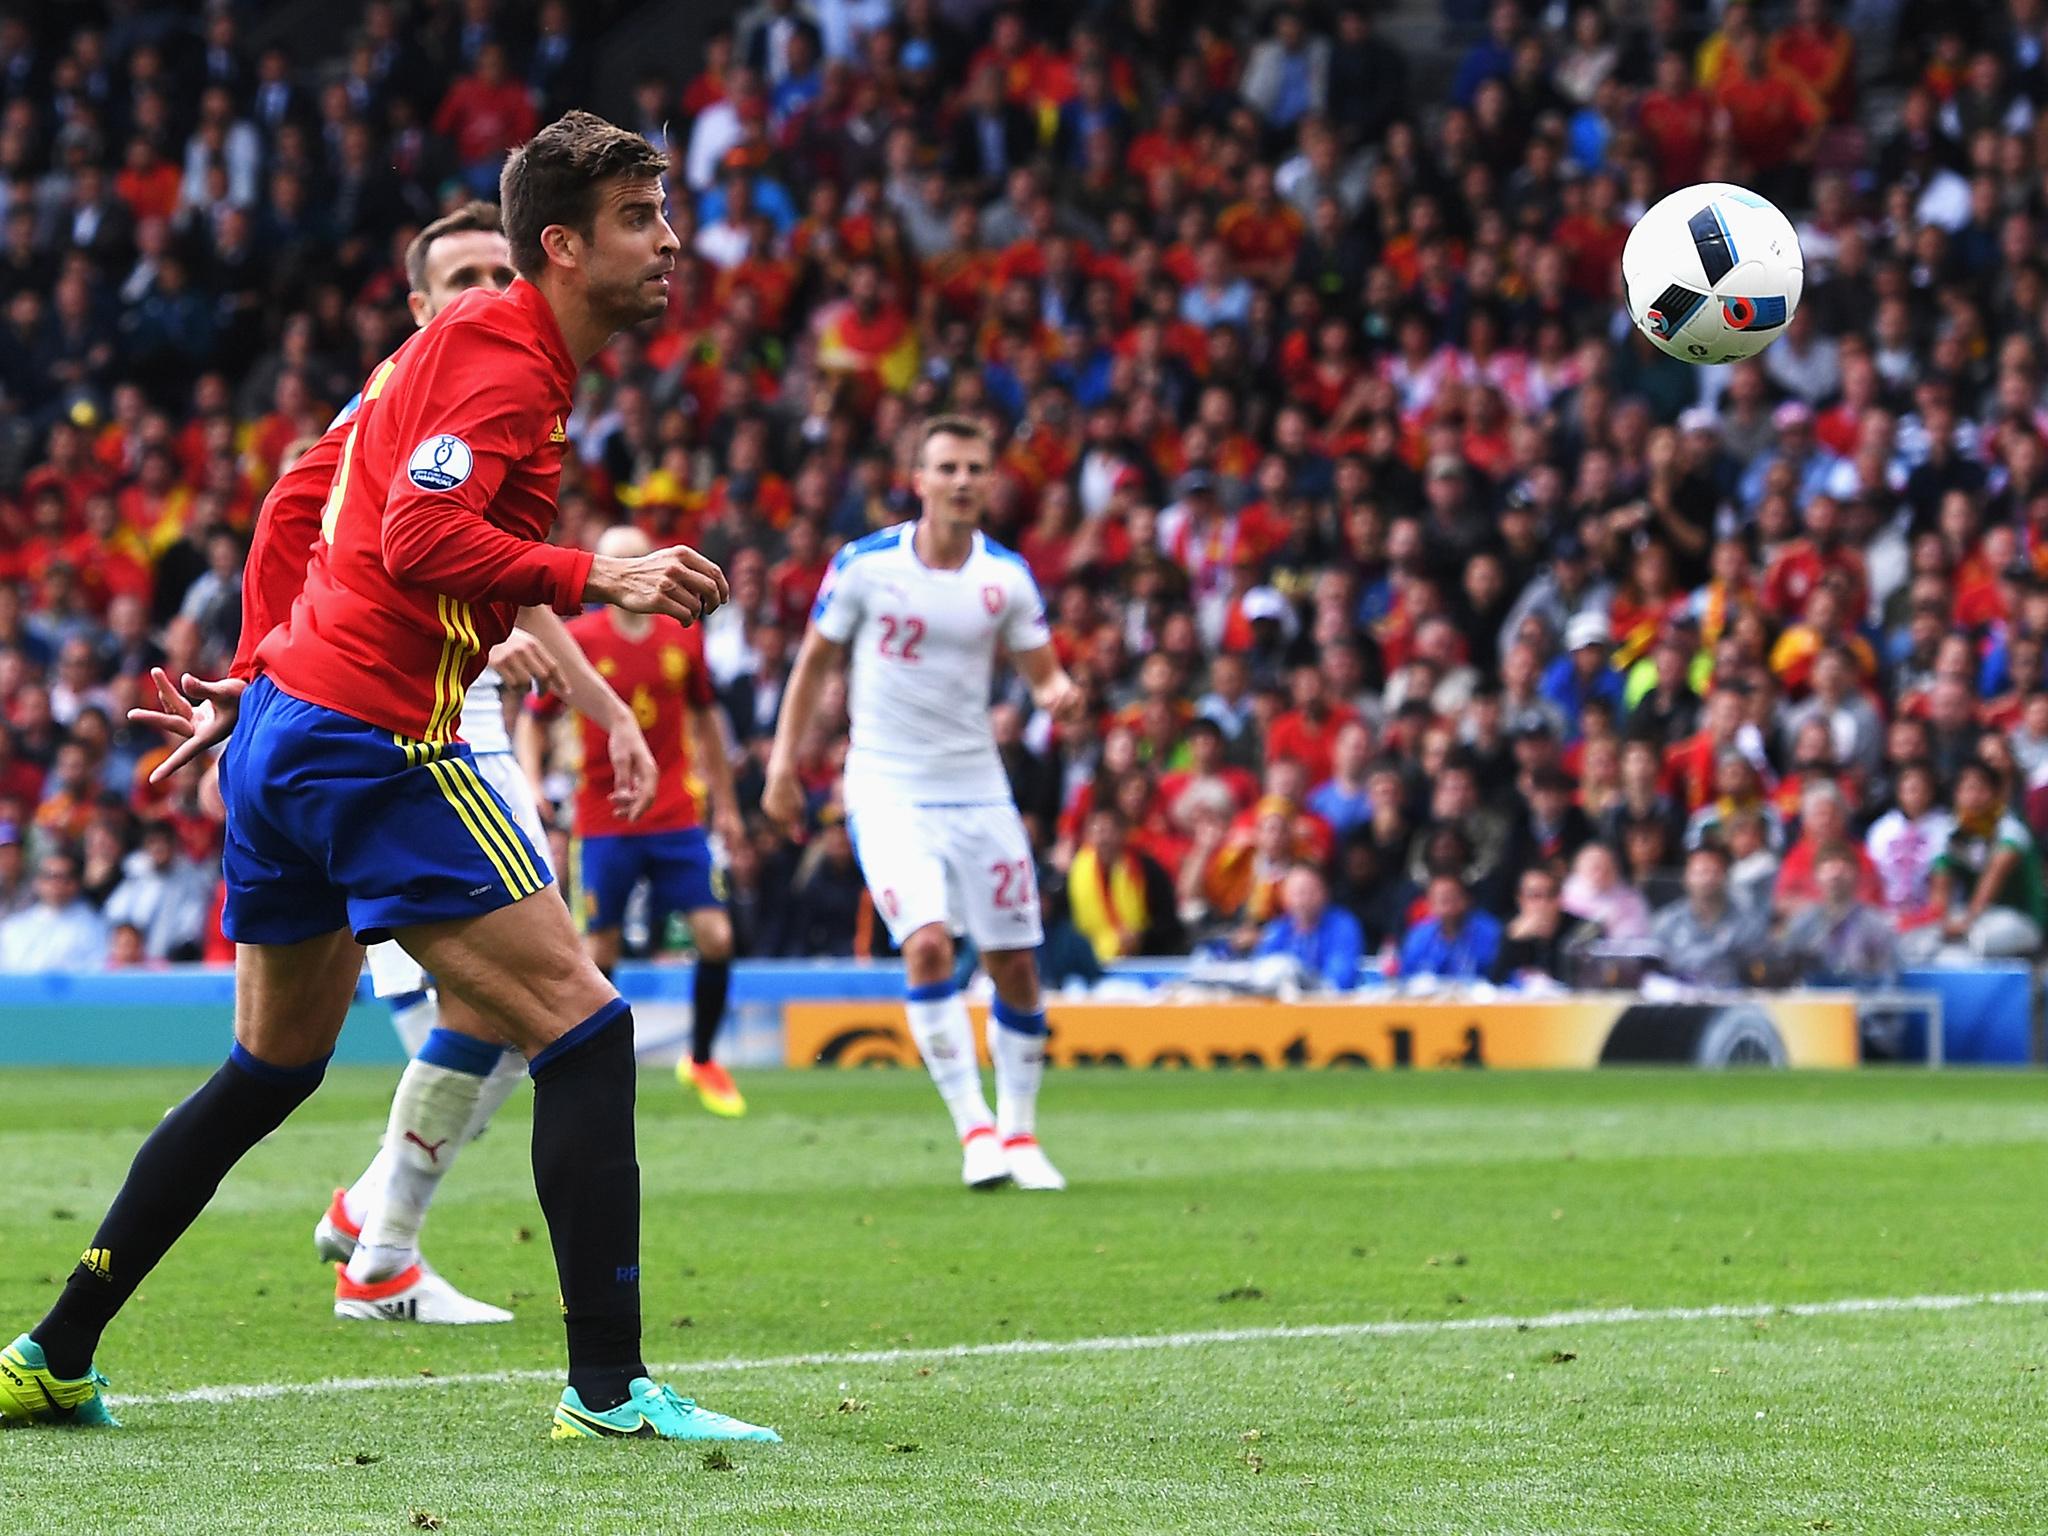 Spain had to wait until the 87th minute to break the deadlock